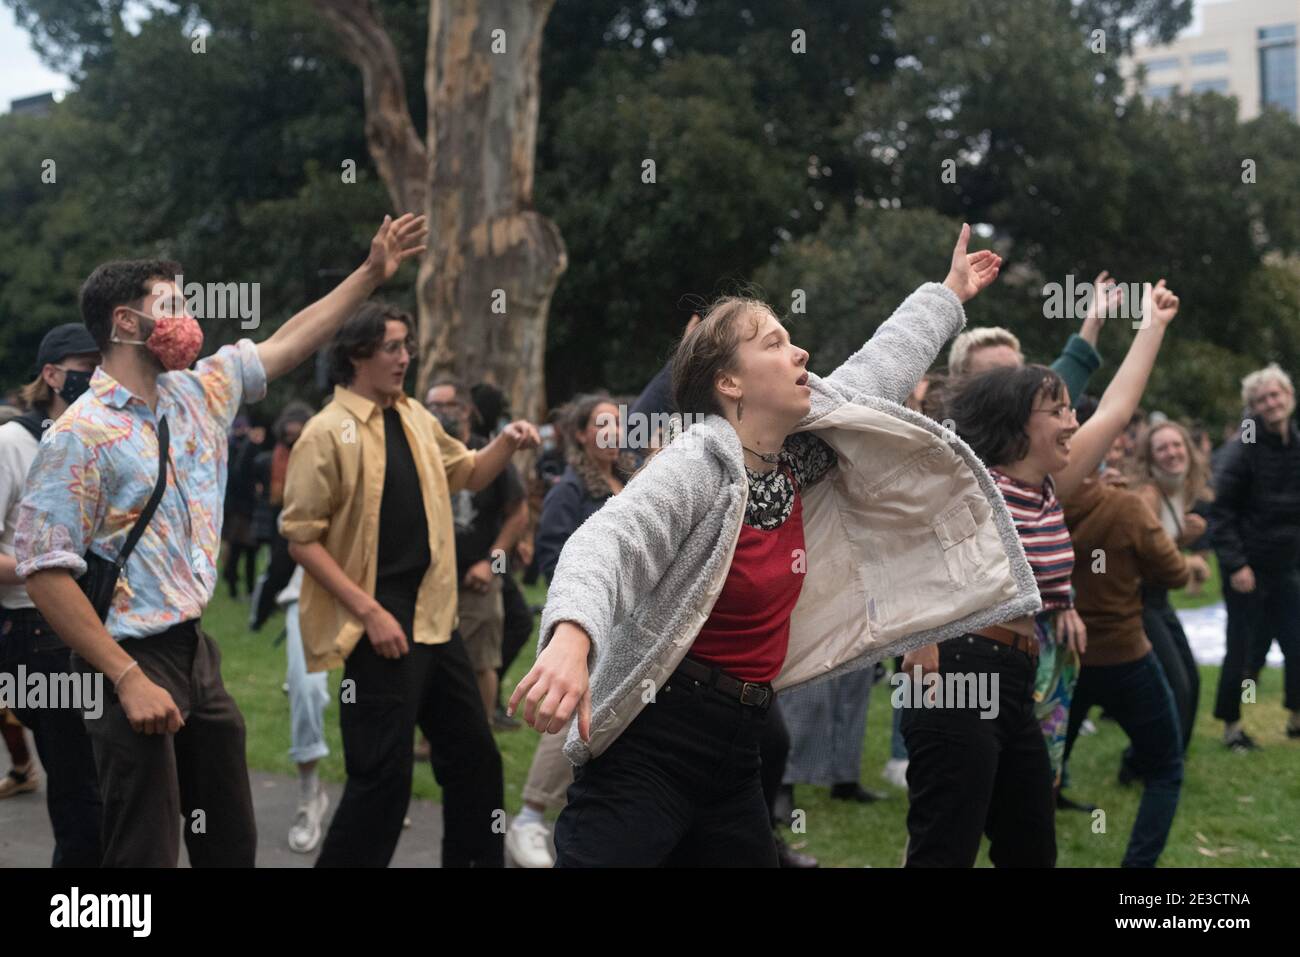 Melbourne, Victoria. 16 January 2021. Free the Refugees Block Party. Protesters with high spirits dancing in sync. Jay Kogler/Alamy Live News Stock Photo